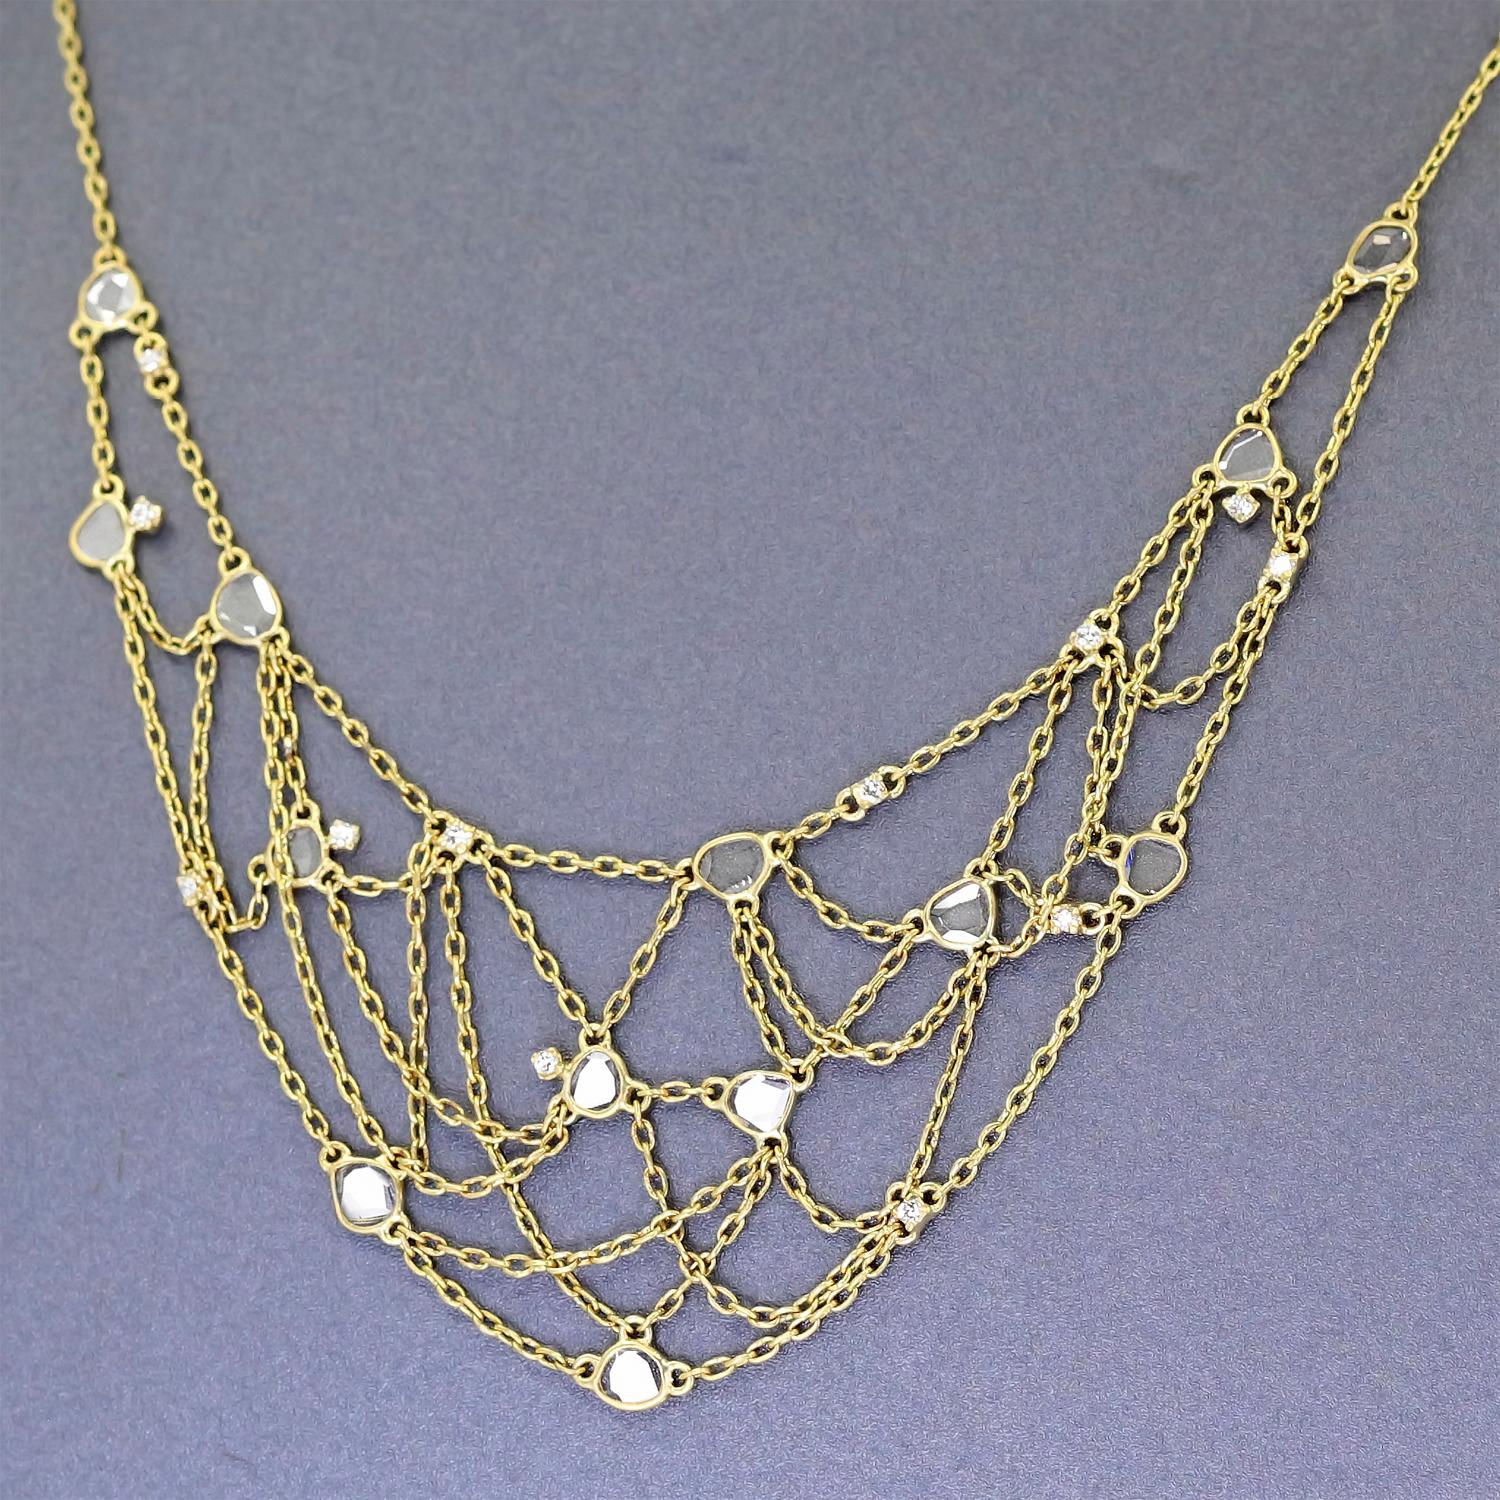 One of a Kind Diamond Bib Necklace handmade in matte finished 18k yellow gold by Tej Kothari featuring thirteen bezel-set shimmering polki diamond faceted slices totaling 0.75 carats accented with twelve prong-set round brilliant-cut white diamonds